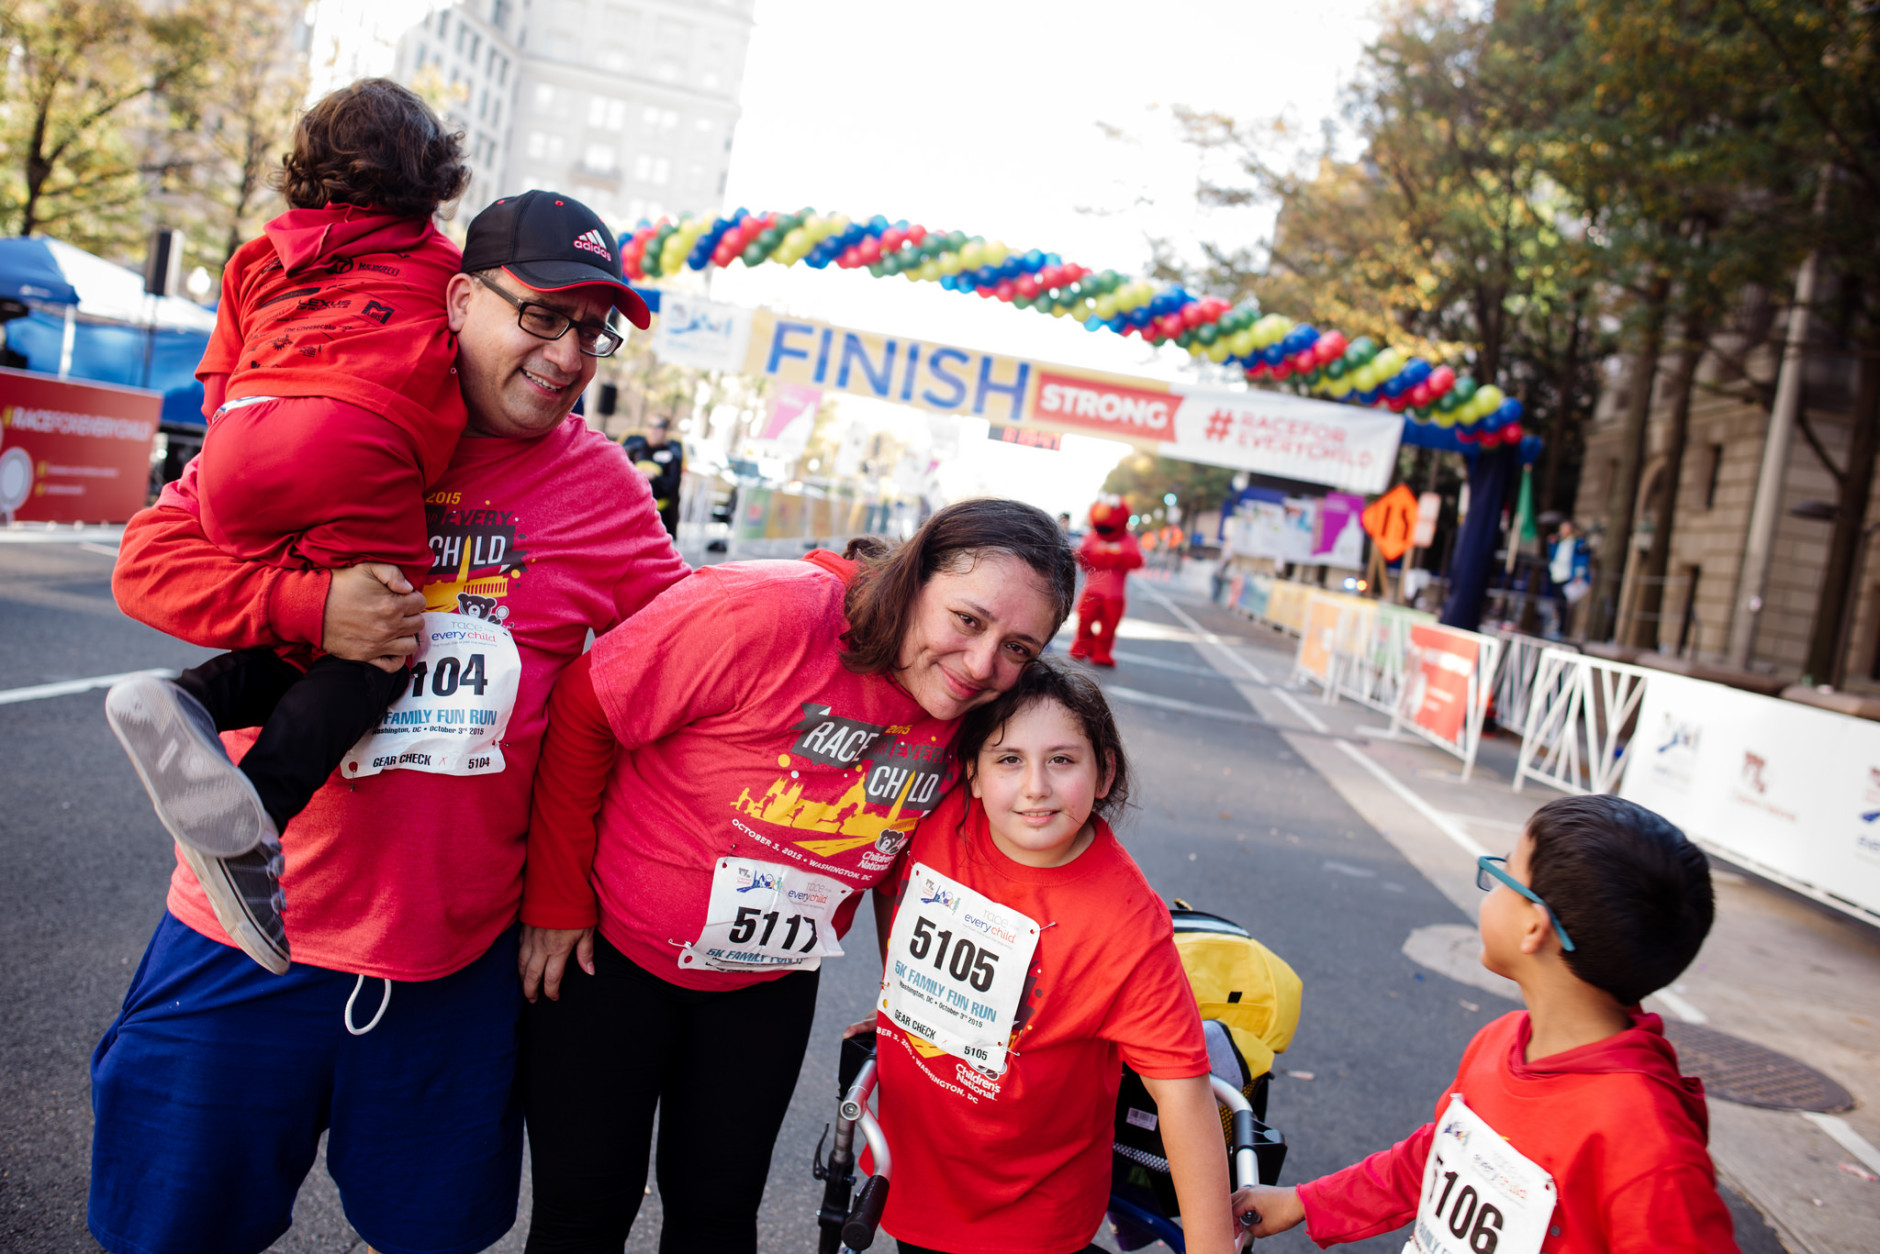 Xochitl Vargas was diagnosed with spastic diplegia cerebral palsy when she was 18 months old. Despite being told she might never walk, Vargas completed her first 5K in 2015 to raise money for other children in need of medical services. (Children's National Health System via Flickr)